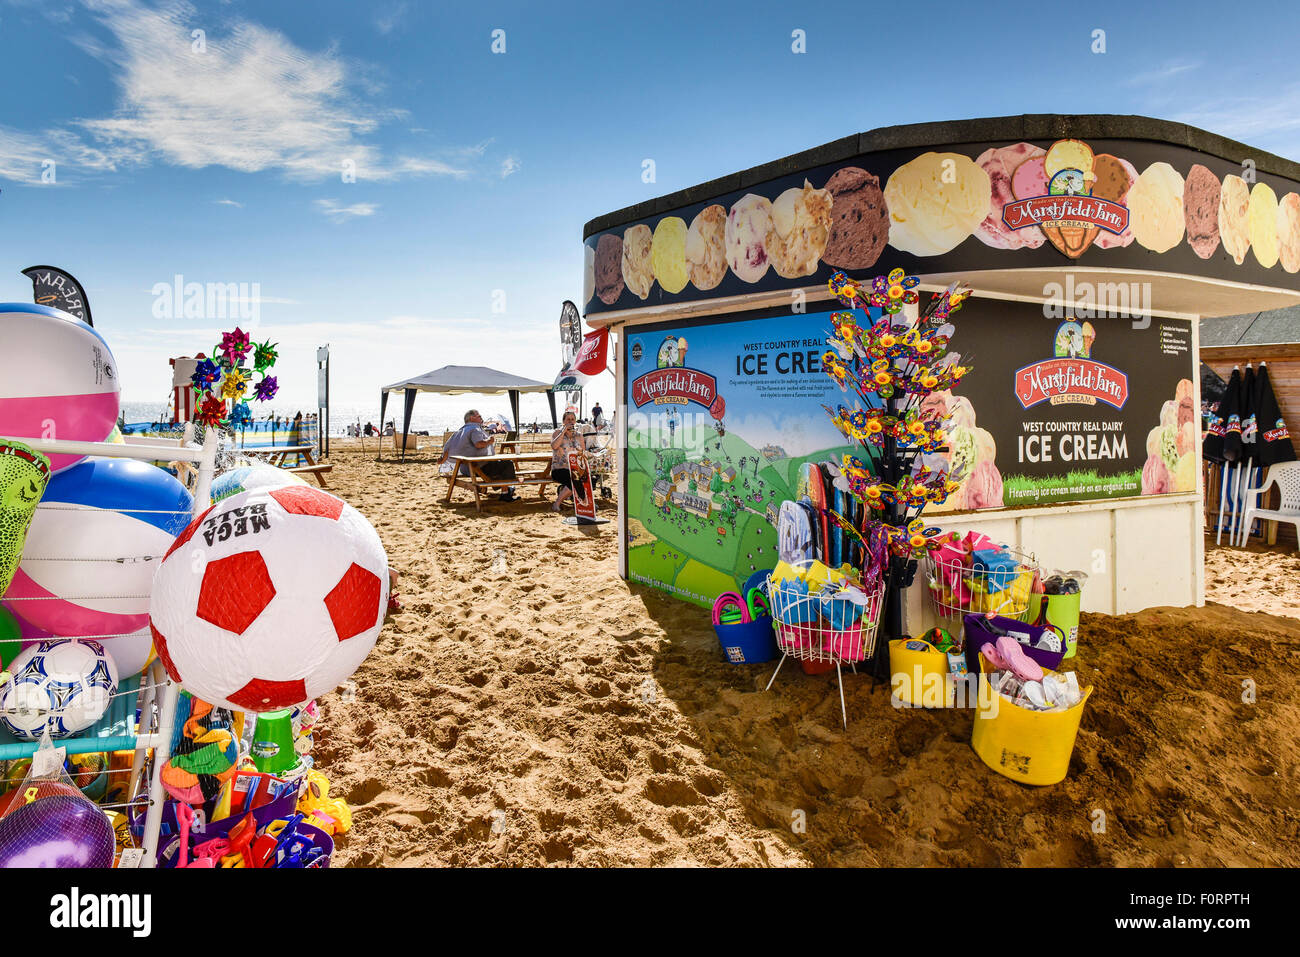 An ice cream kiosk on the beach at Viking Bay in Broadstairs, Kent. Stock Photo